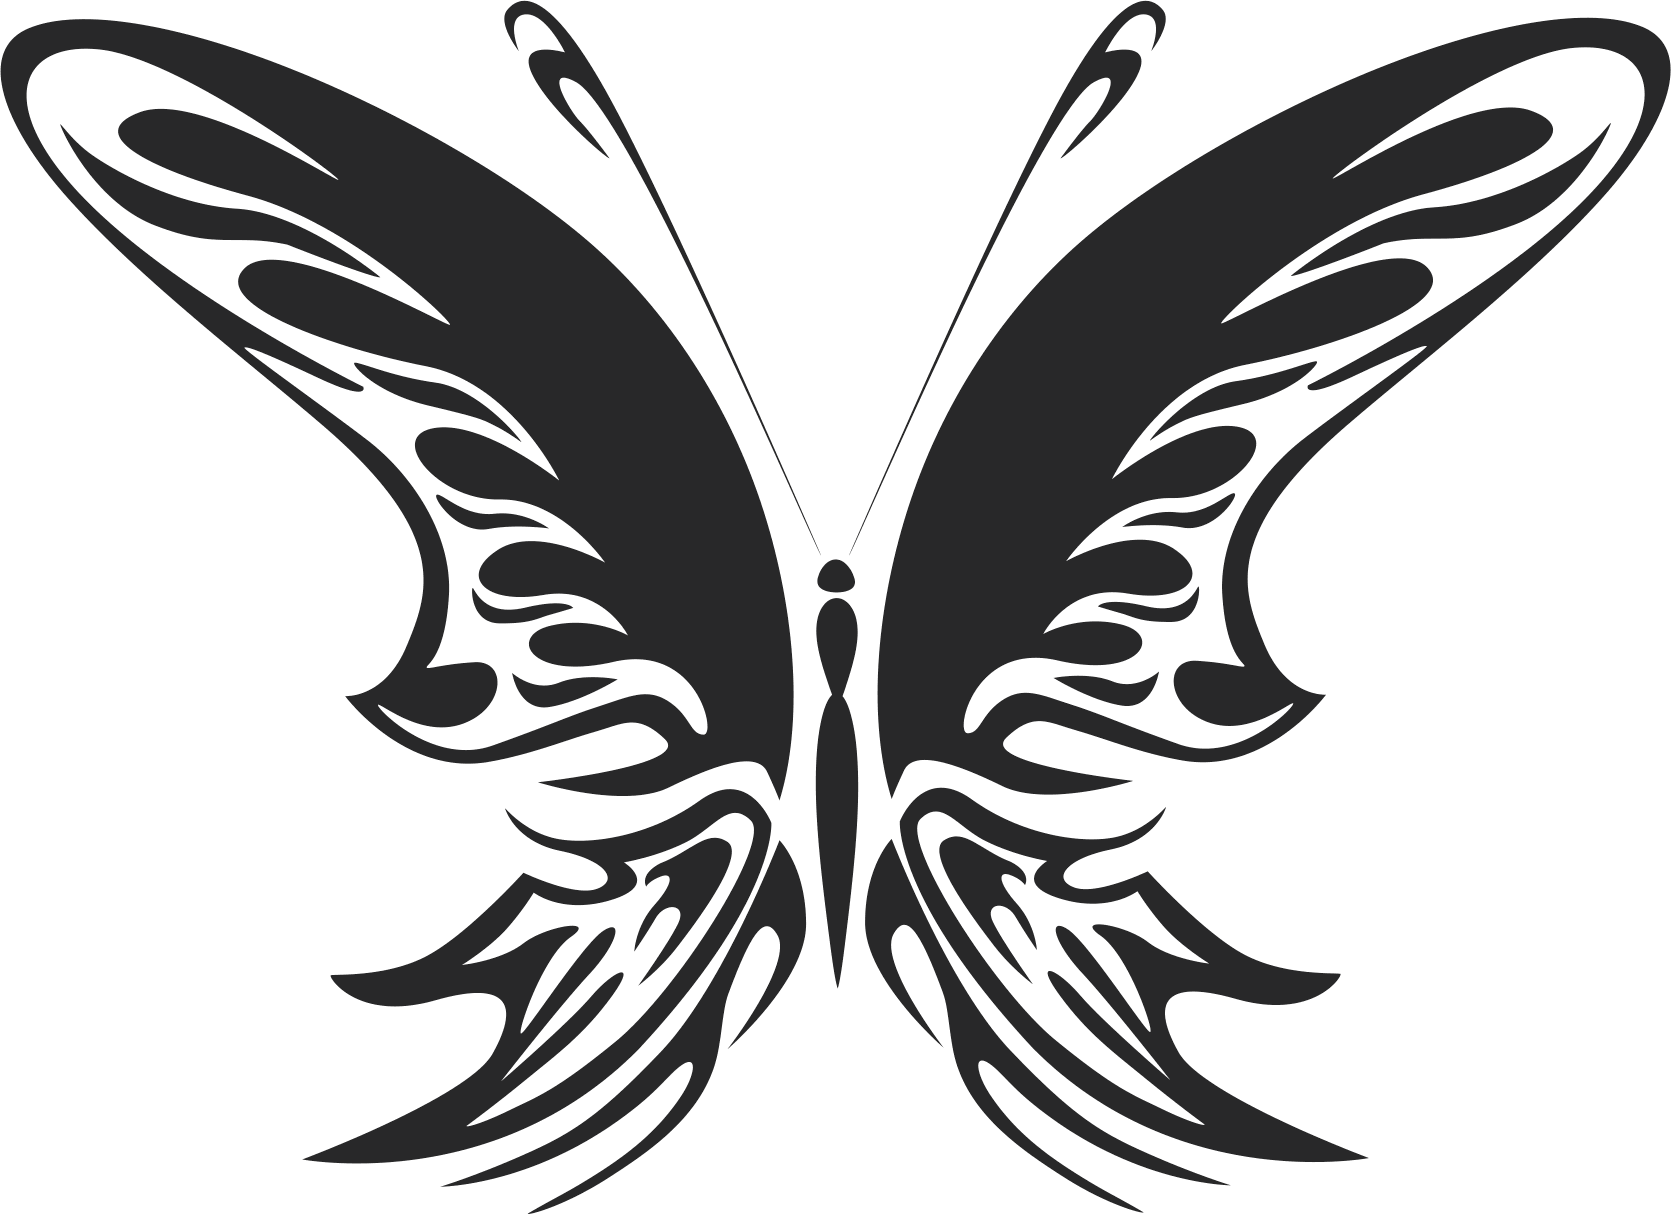 butterfly-vector-art-022-free-vector-cdr-download-3axis-co